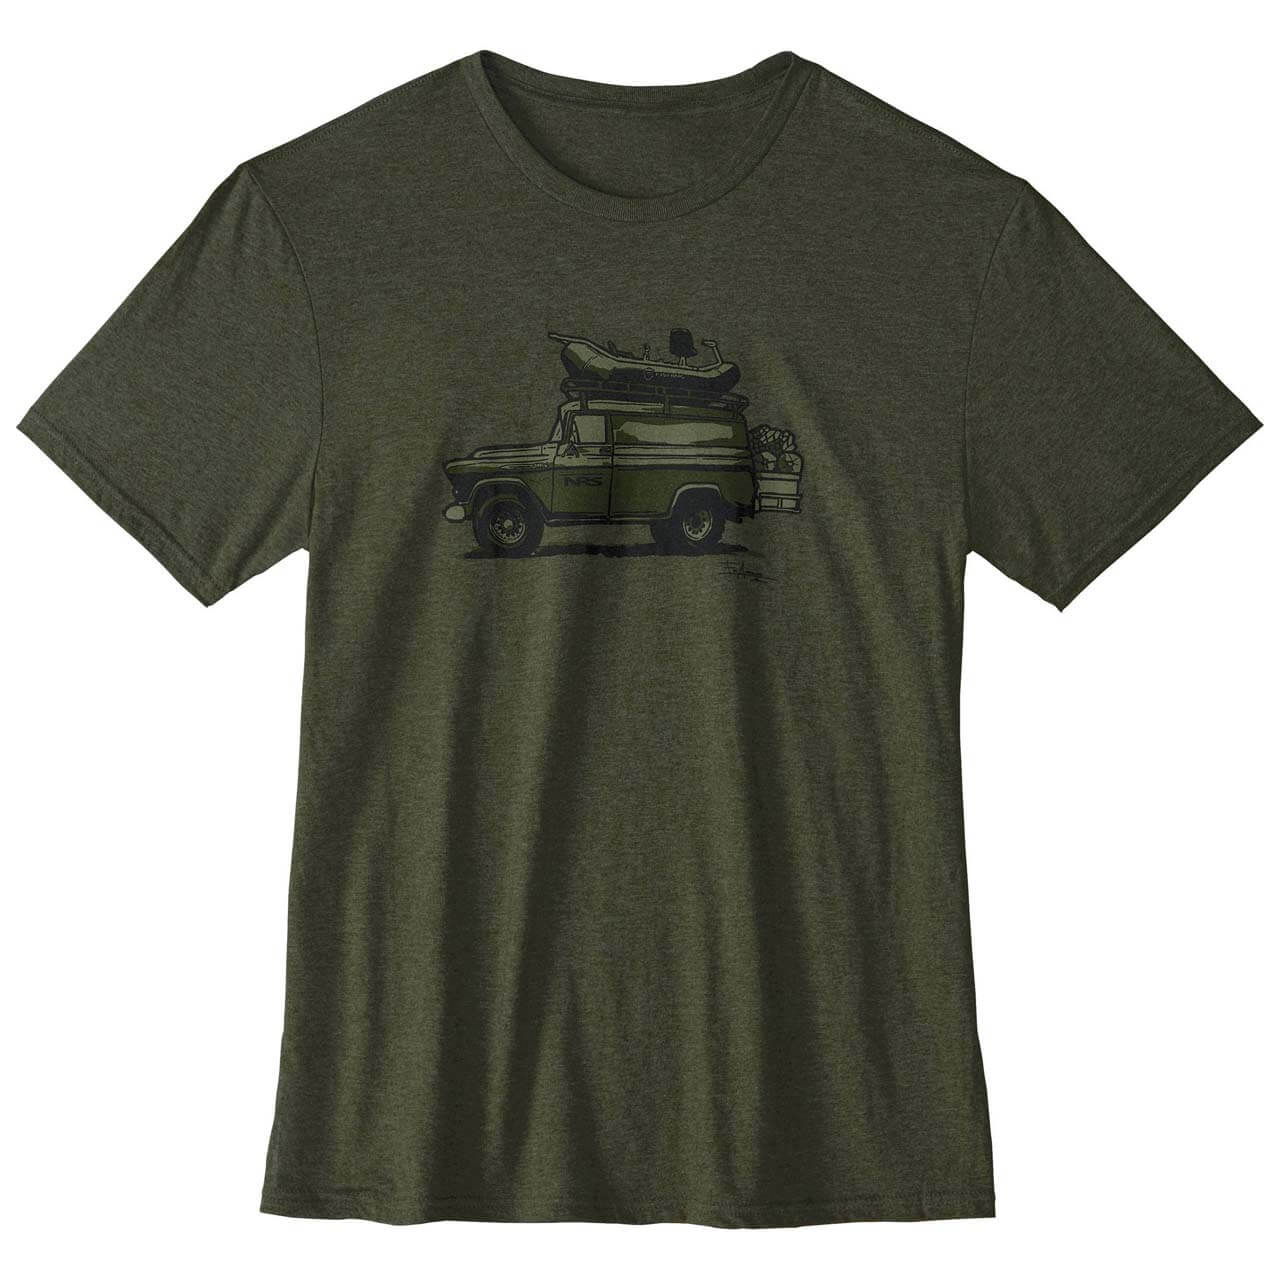 NRS Rigged Out T-Shirt - Heathered Olive, M von NRS}